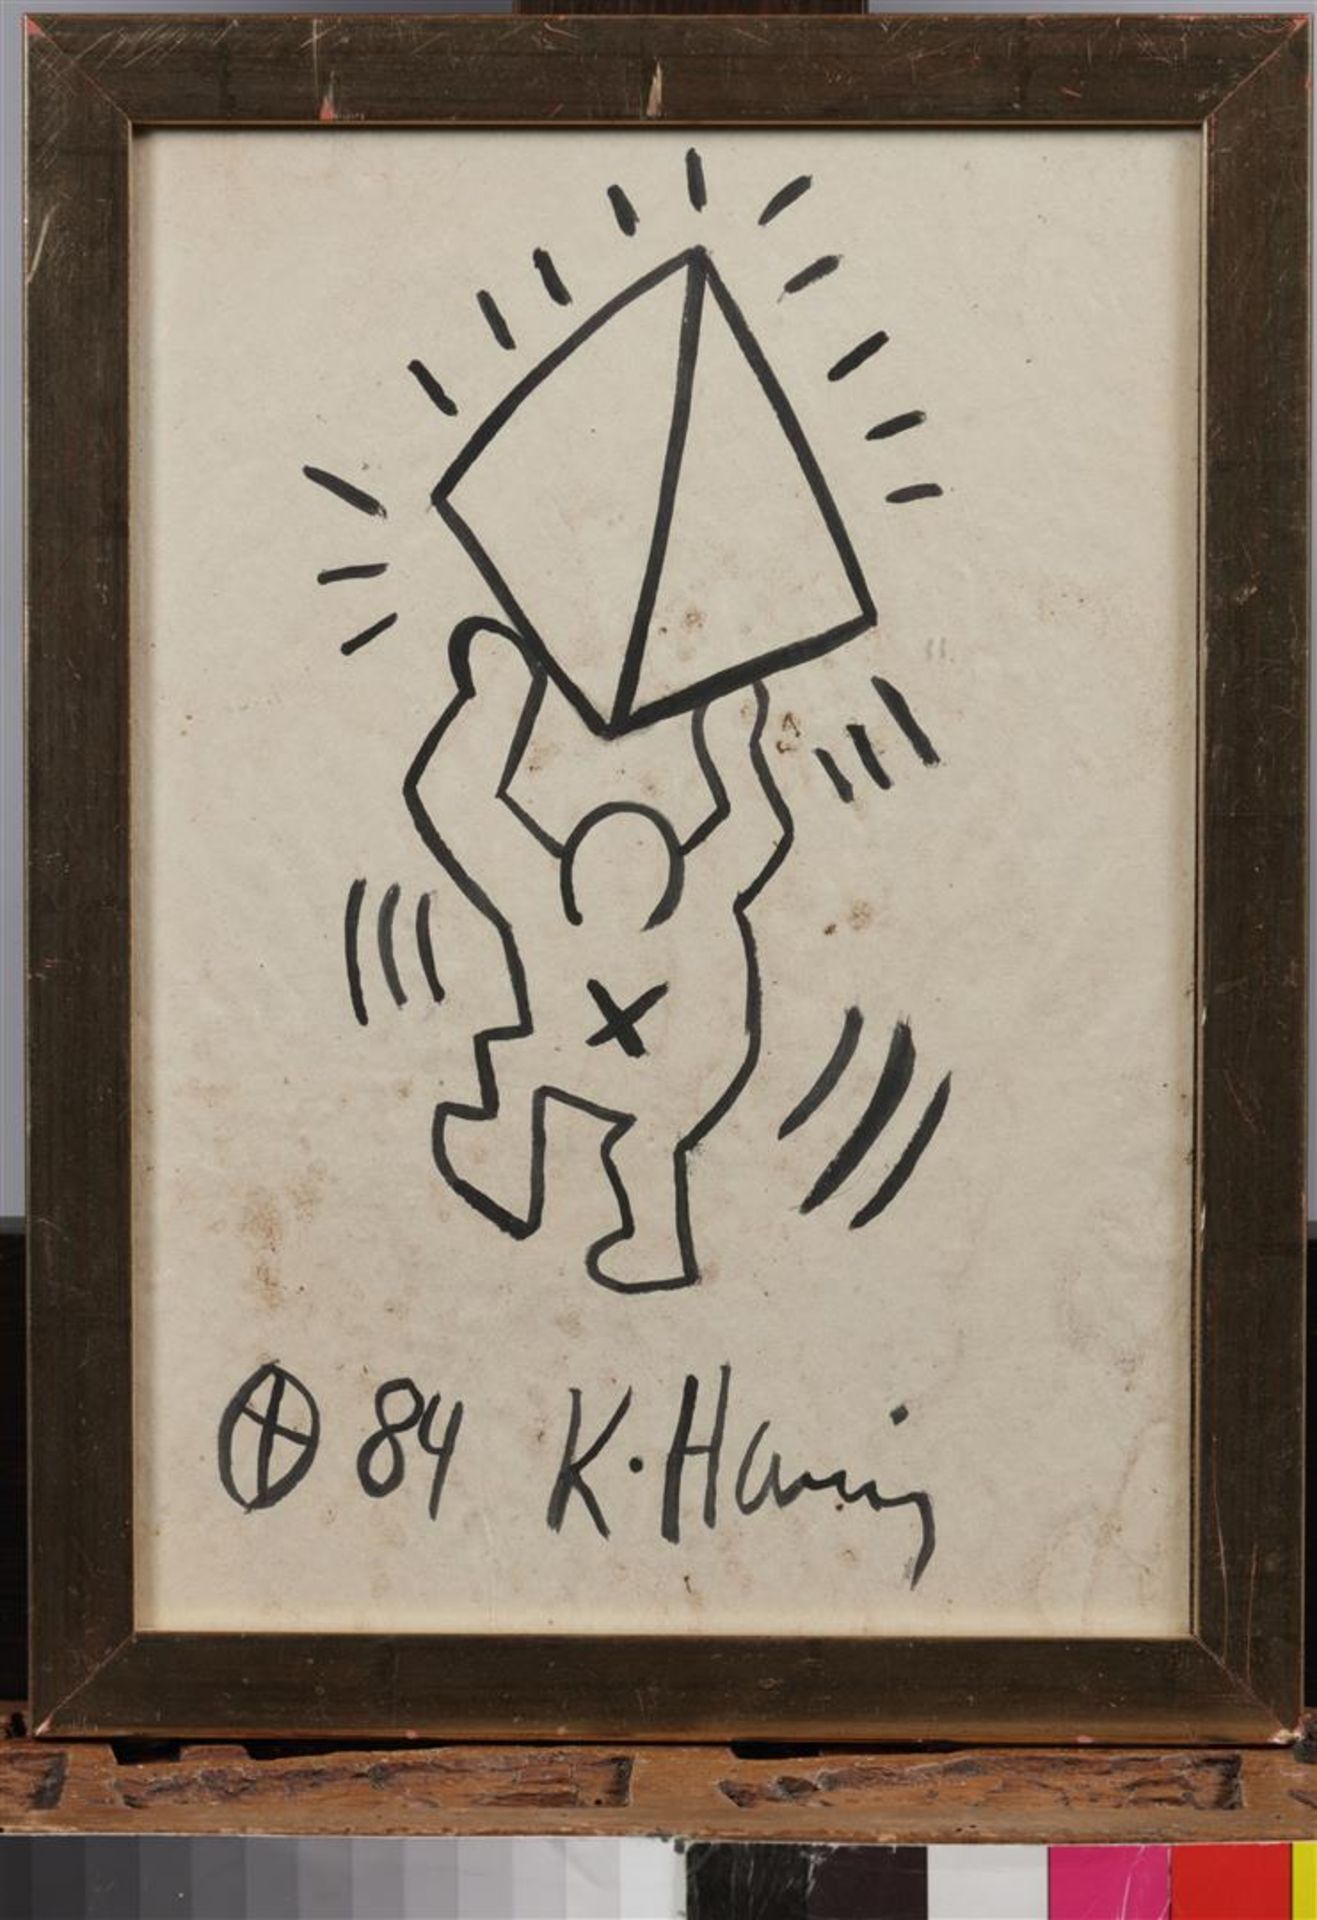 Keith Haring (1958-1990)
Man with kite, signed, and dated '